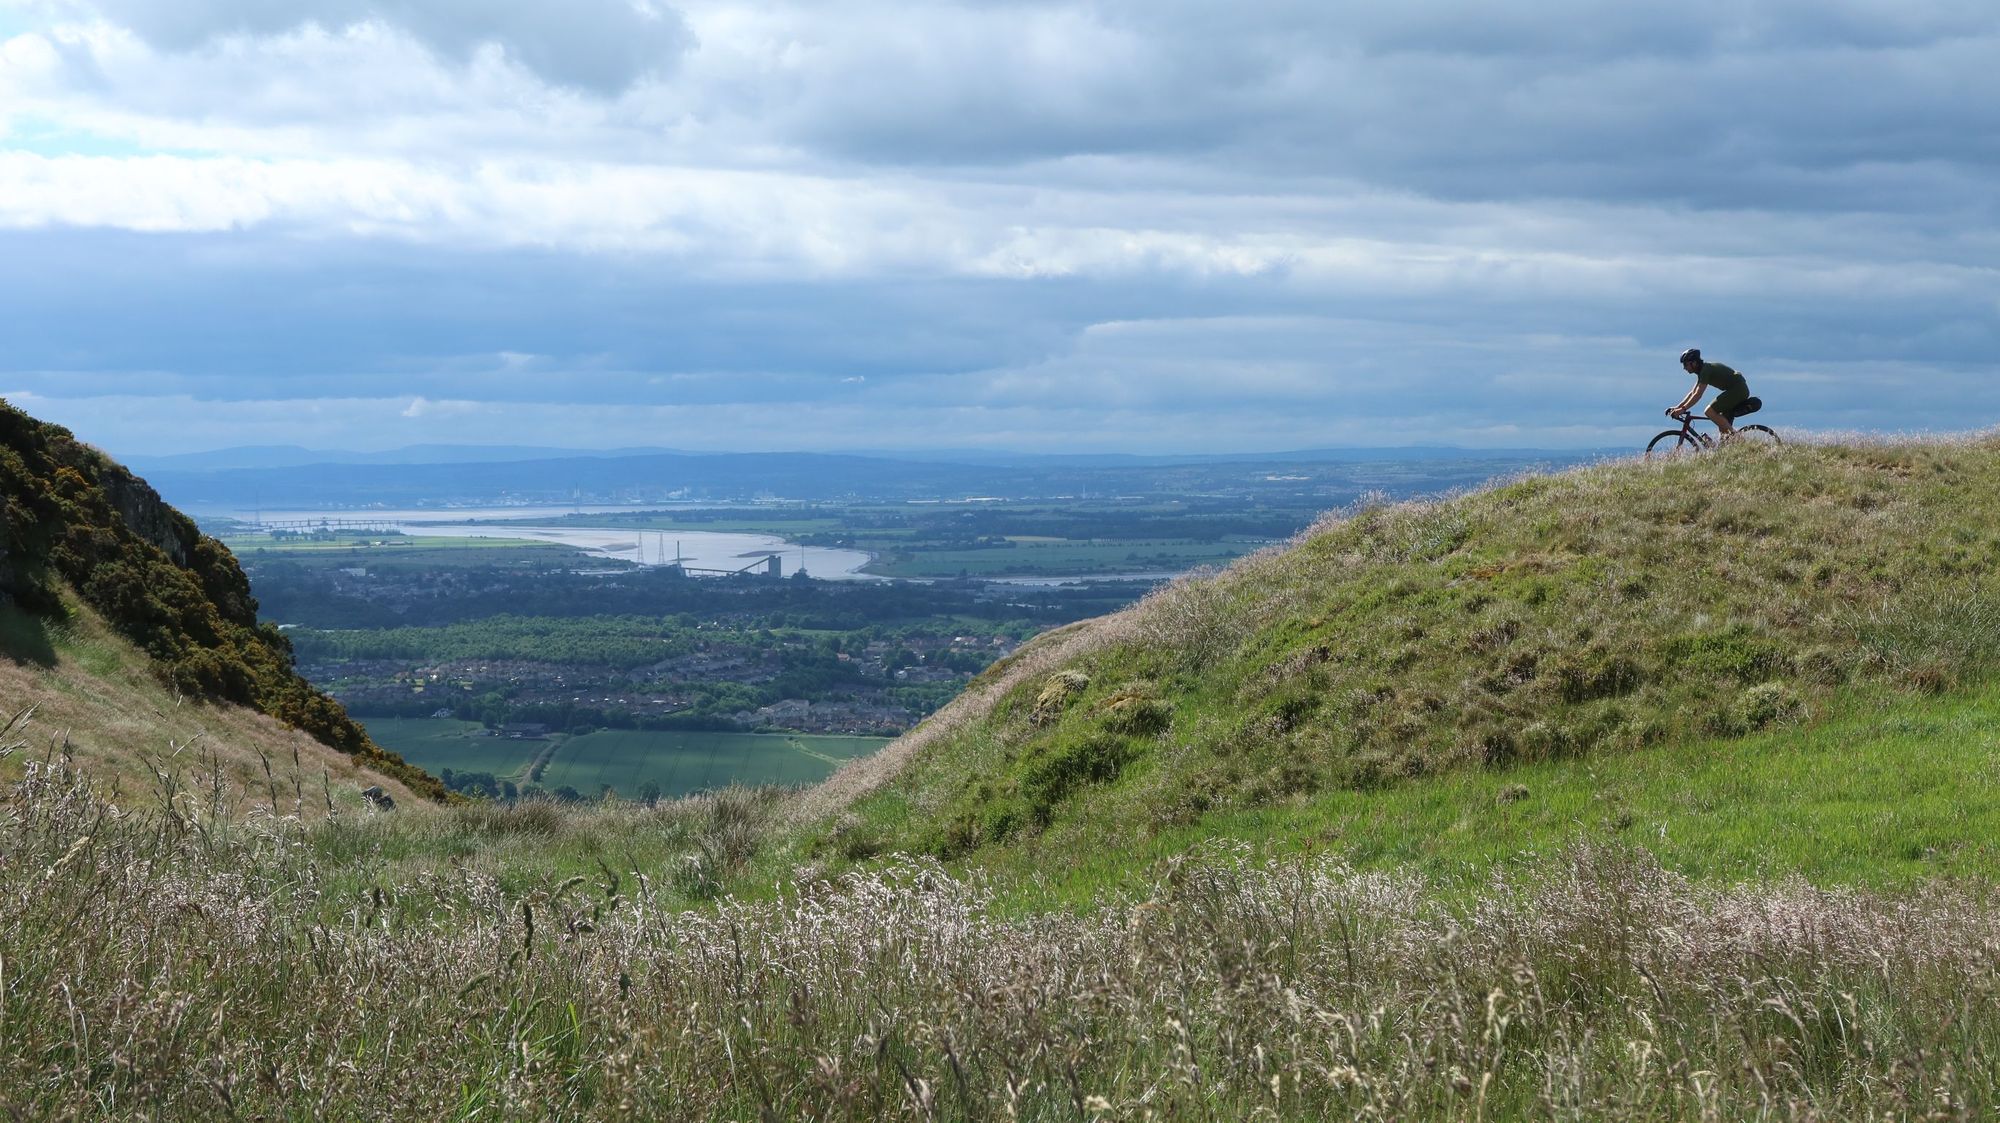 A beautiful view out over Clackmannanshire, seen by surprisingly few cyclists. Photo: Markus Stitz